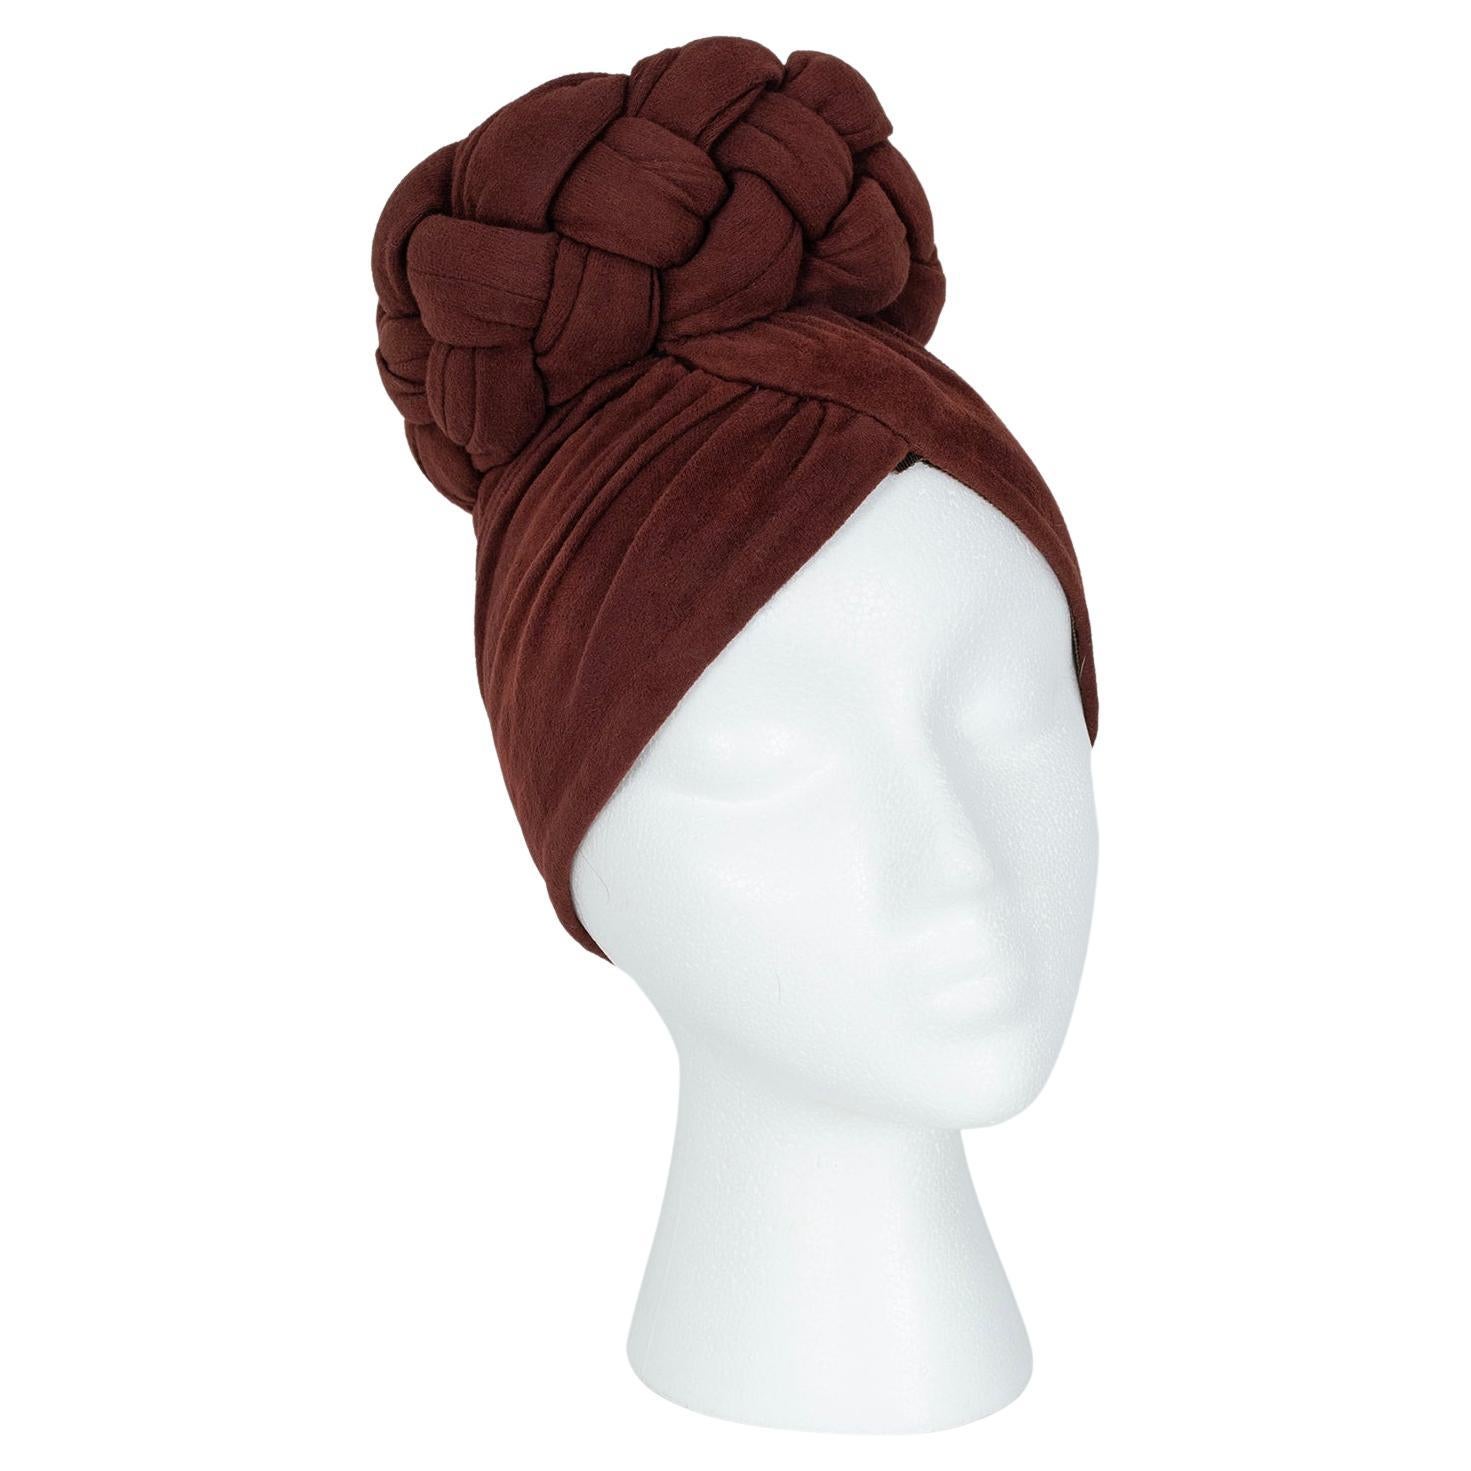 Chocolate Brown Skullcap Statement Turban with Tall Braided Crown – O/S, 1940s